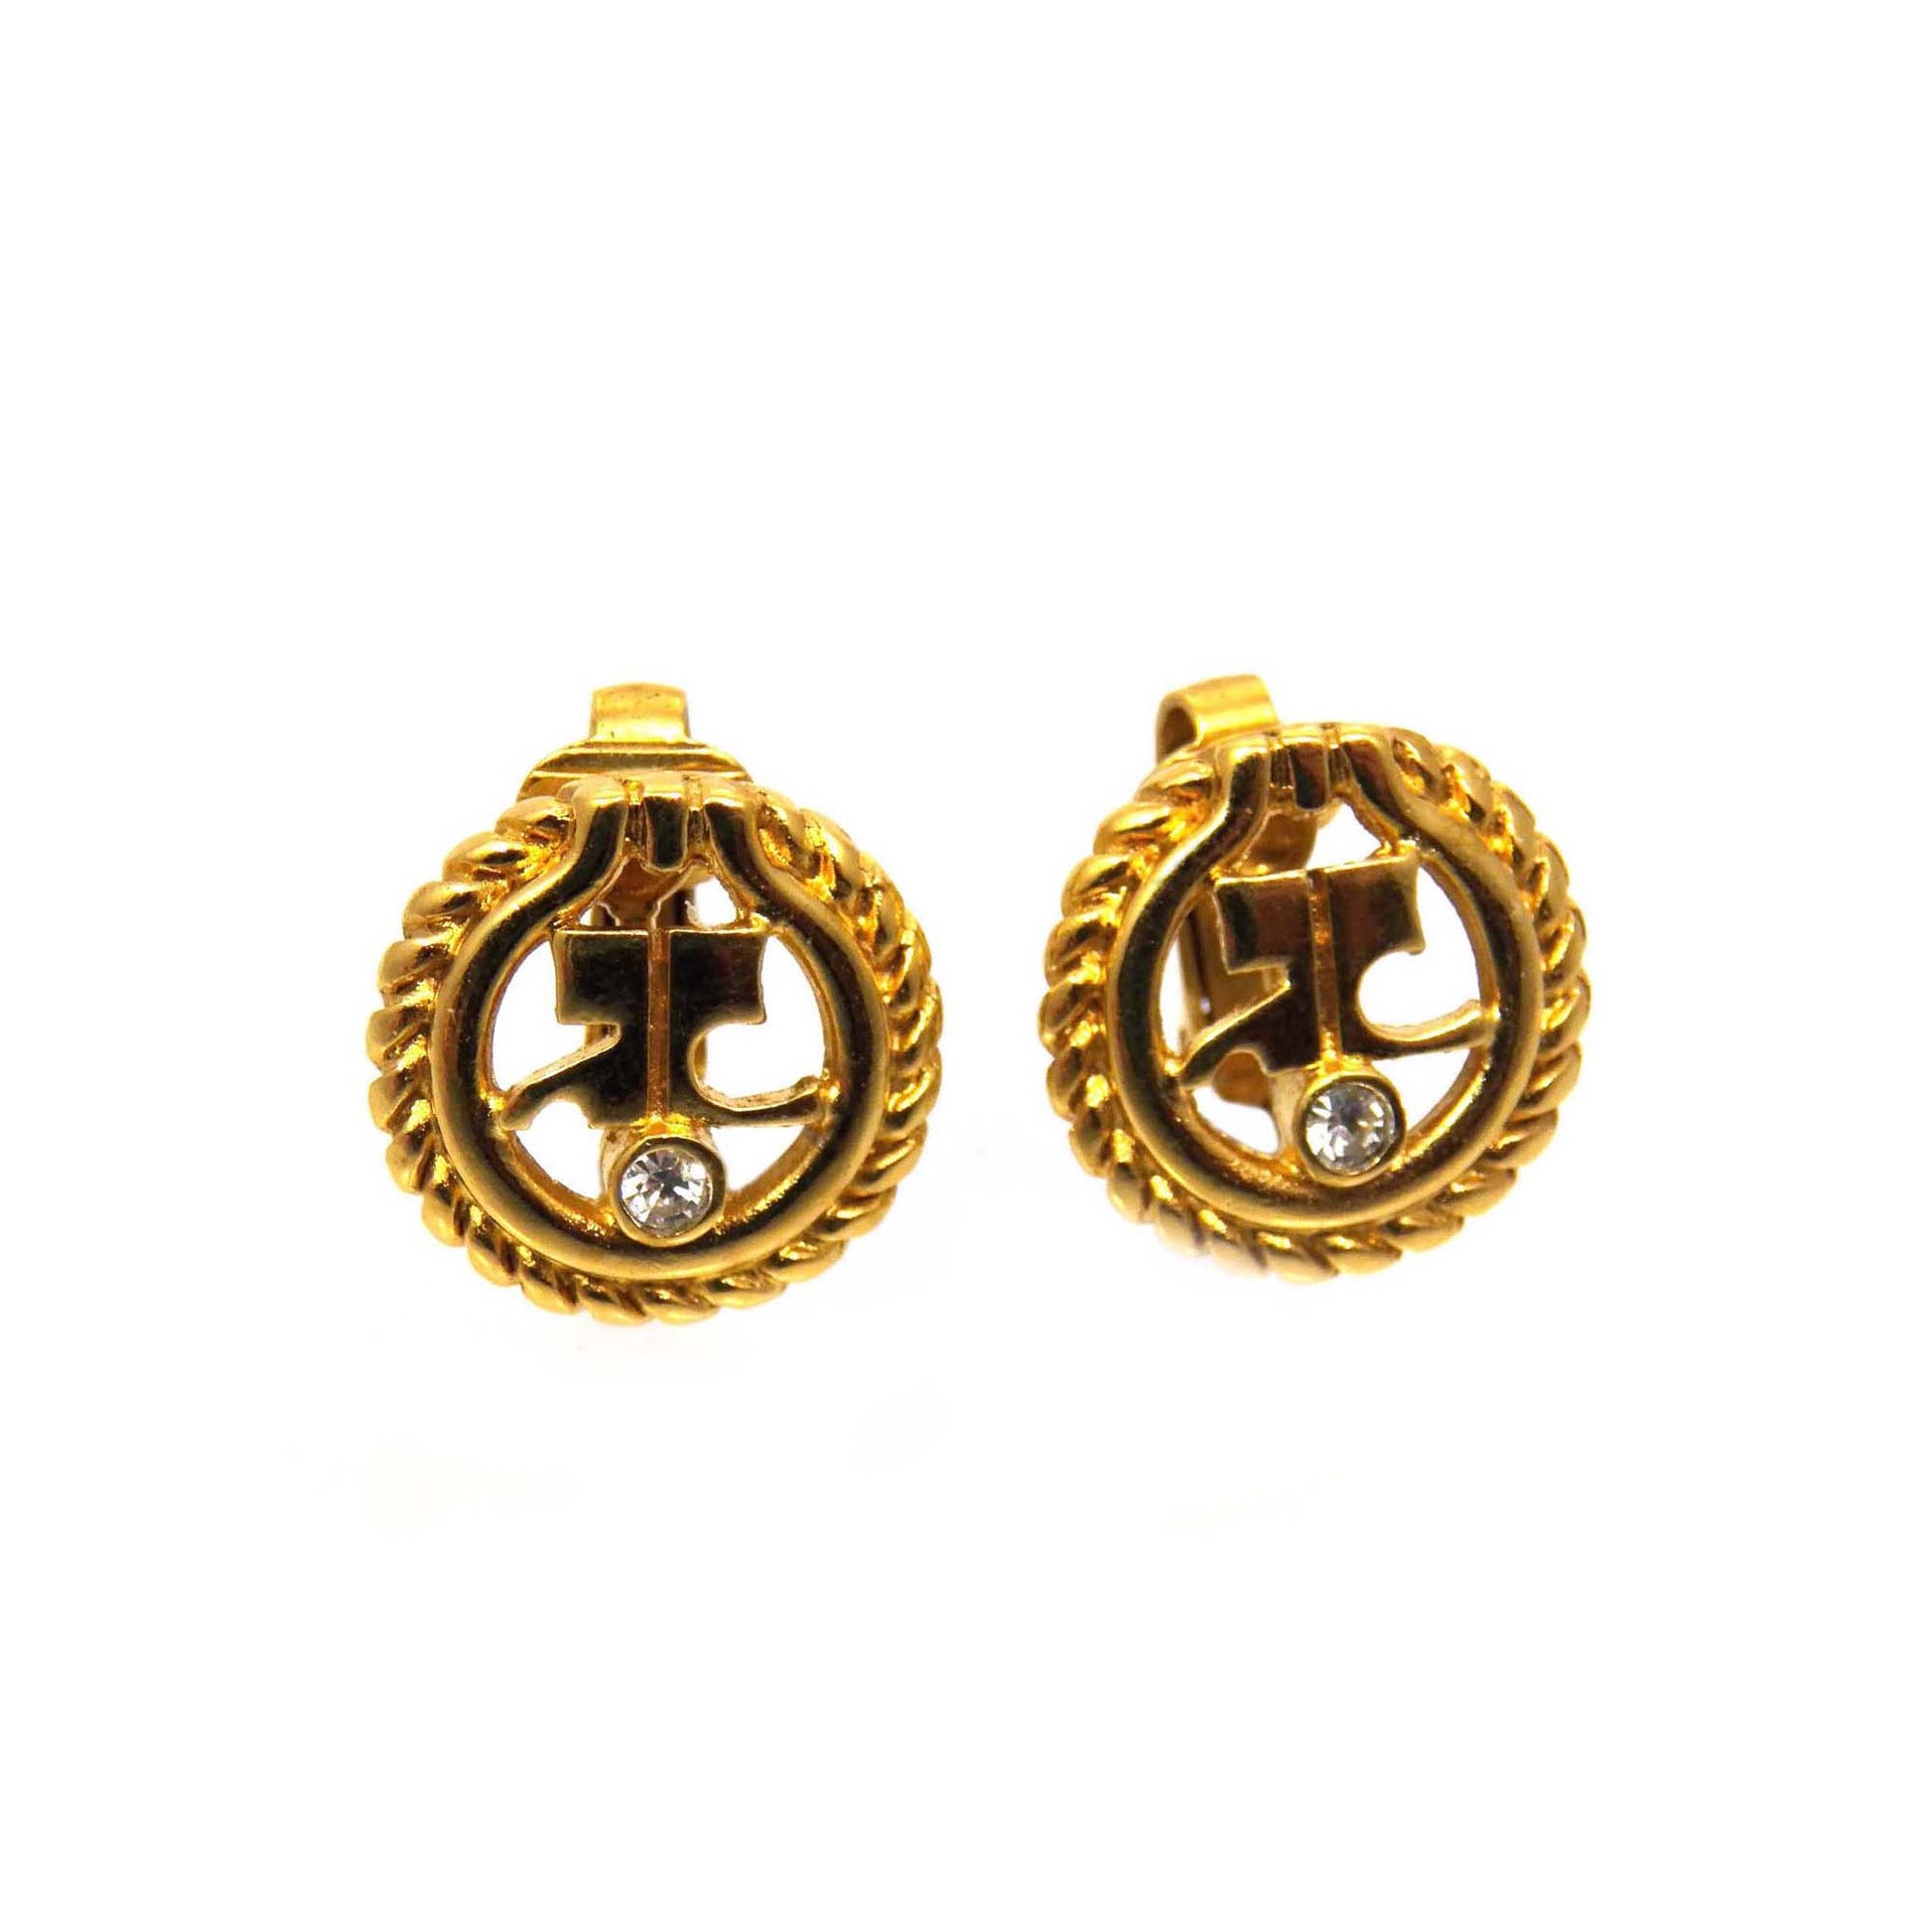 Andre Courreges Logo Gold Tone Clip On Earrings,